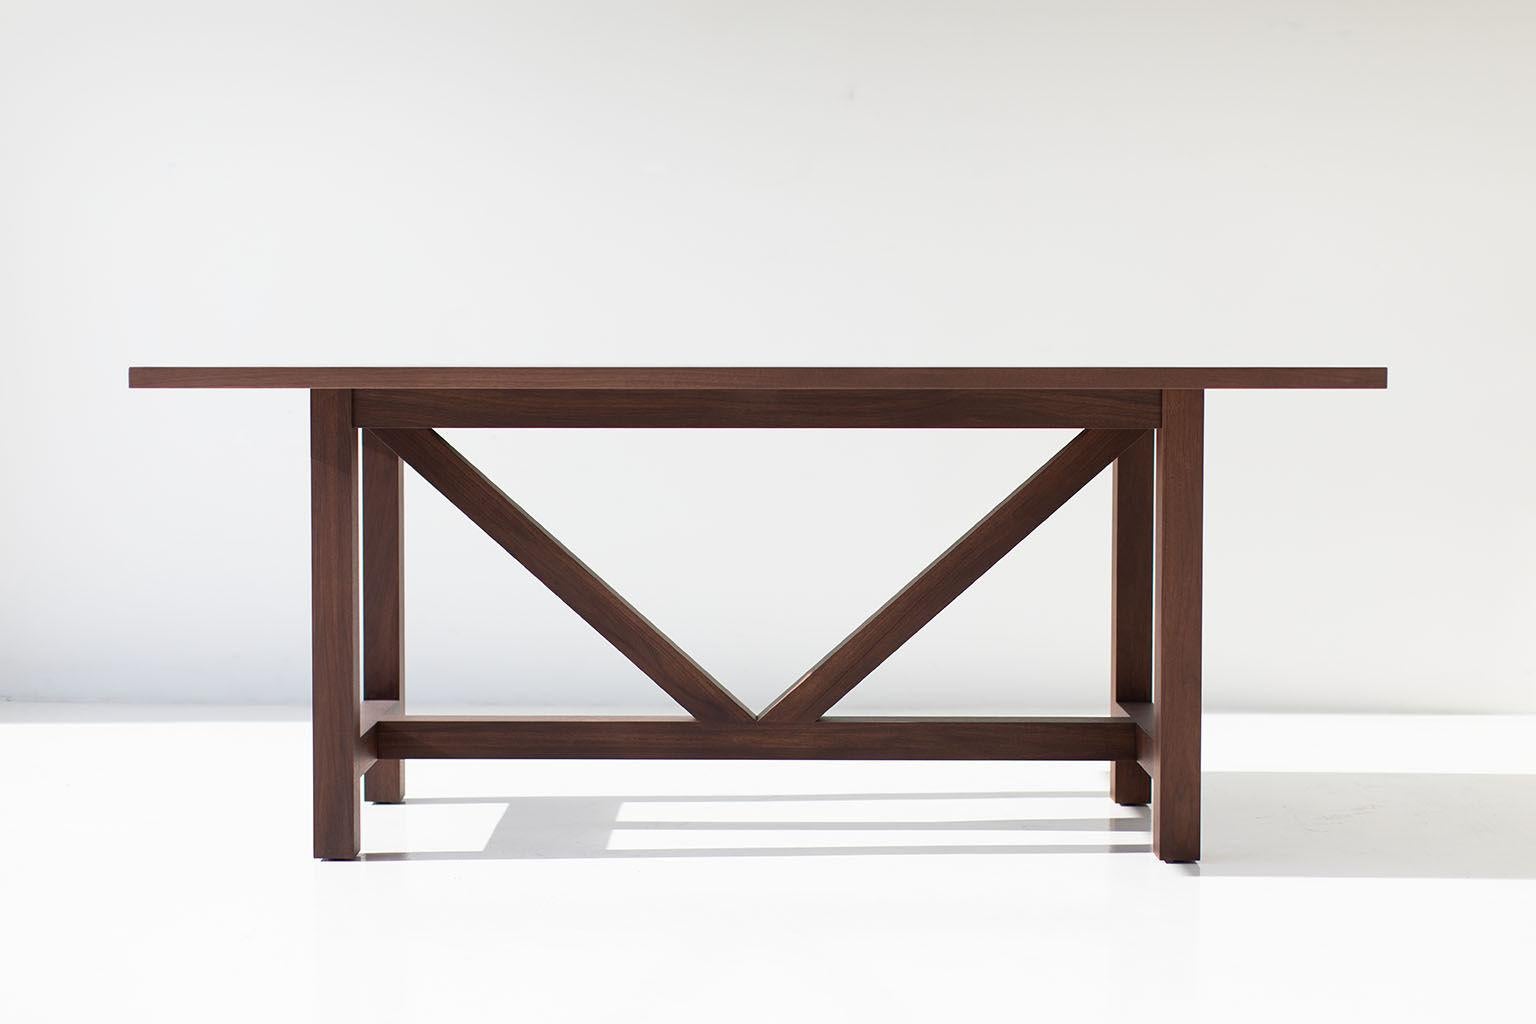 Farm table walnut dining table for Bertu Home.

This walnut farm table is made in the heart of Ohio with locally sourced wood. We use the table both as a dining table or desk. Each table is handmade with solid walnut and finished with a beautiful